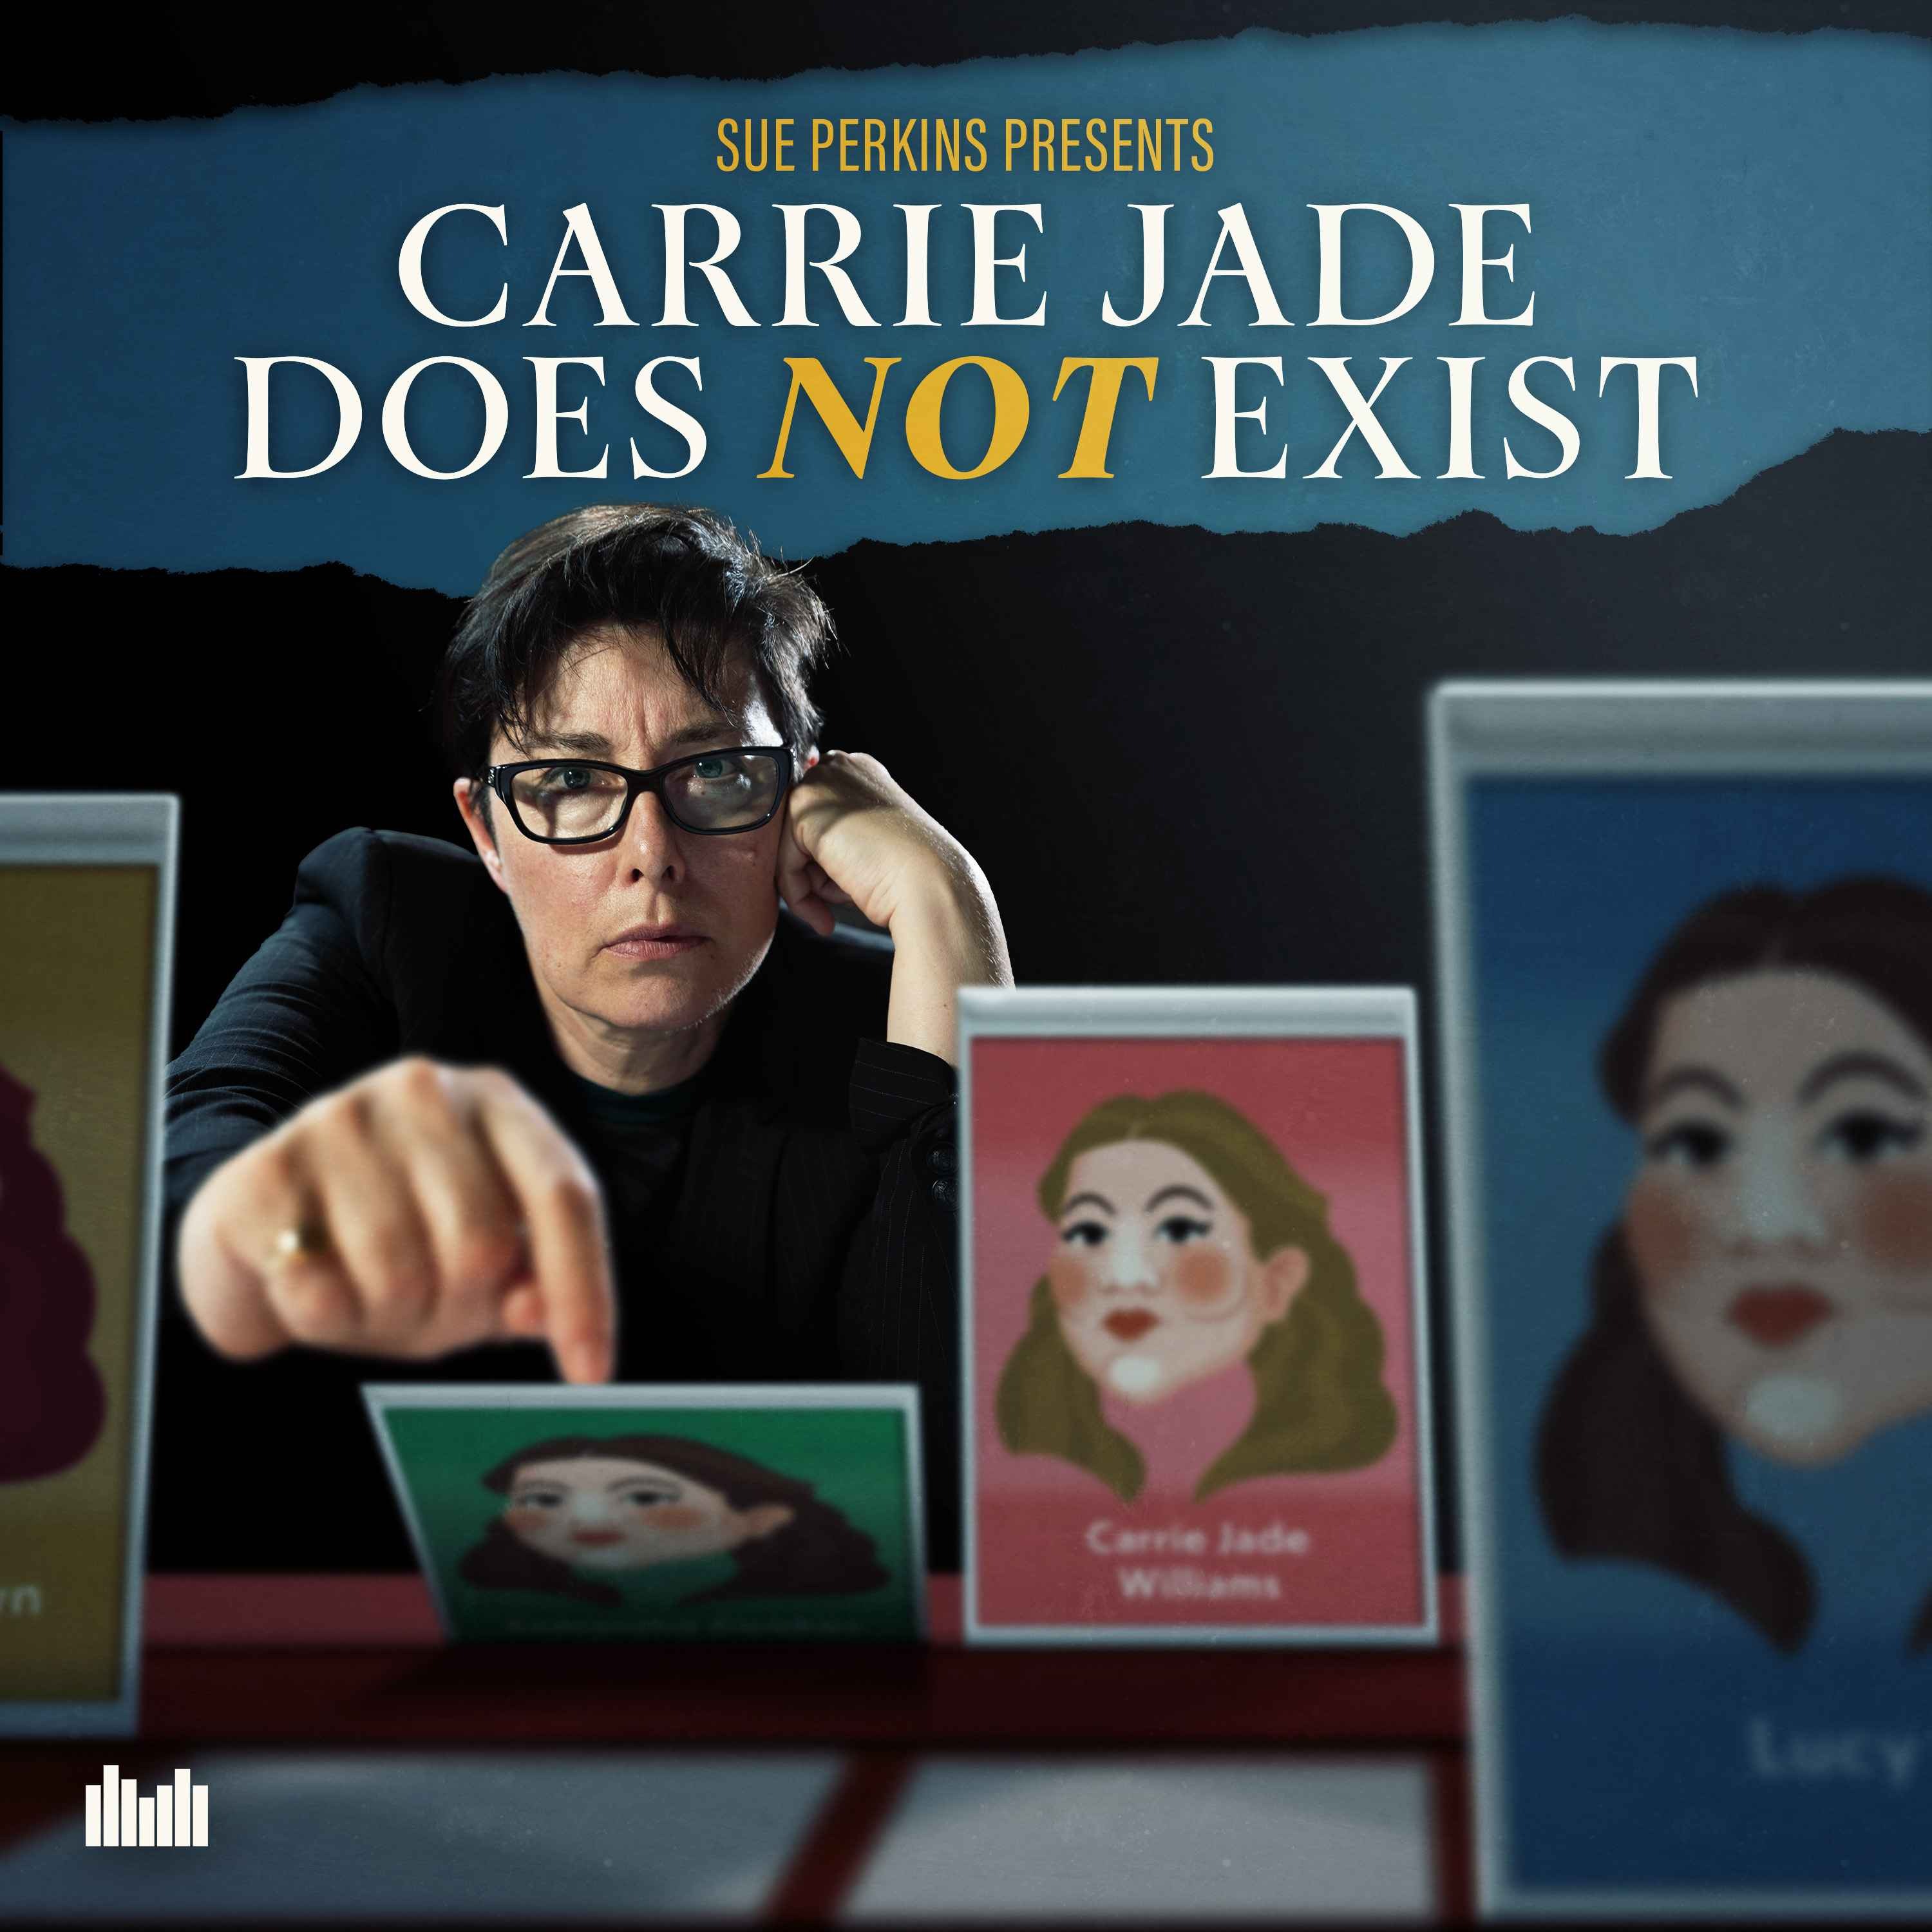 Carrie Jade Does Not Exist podcast show image